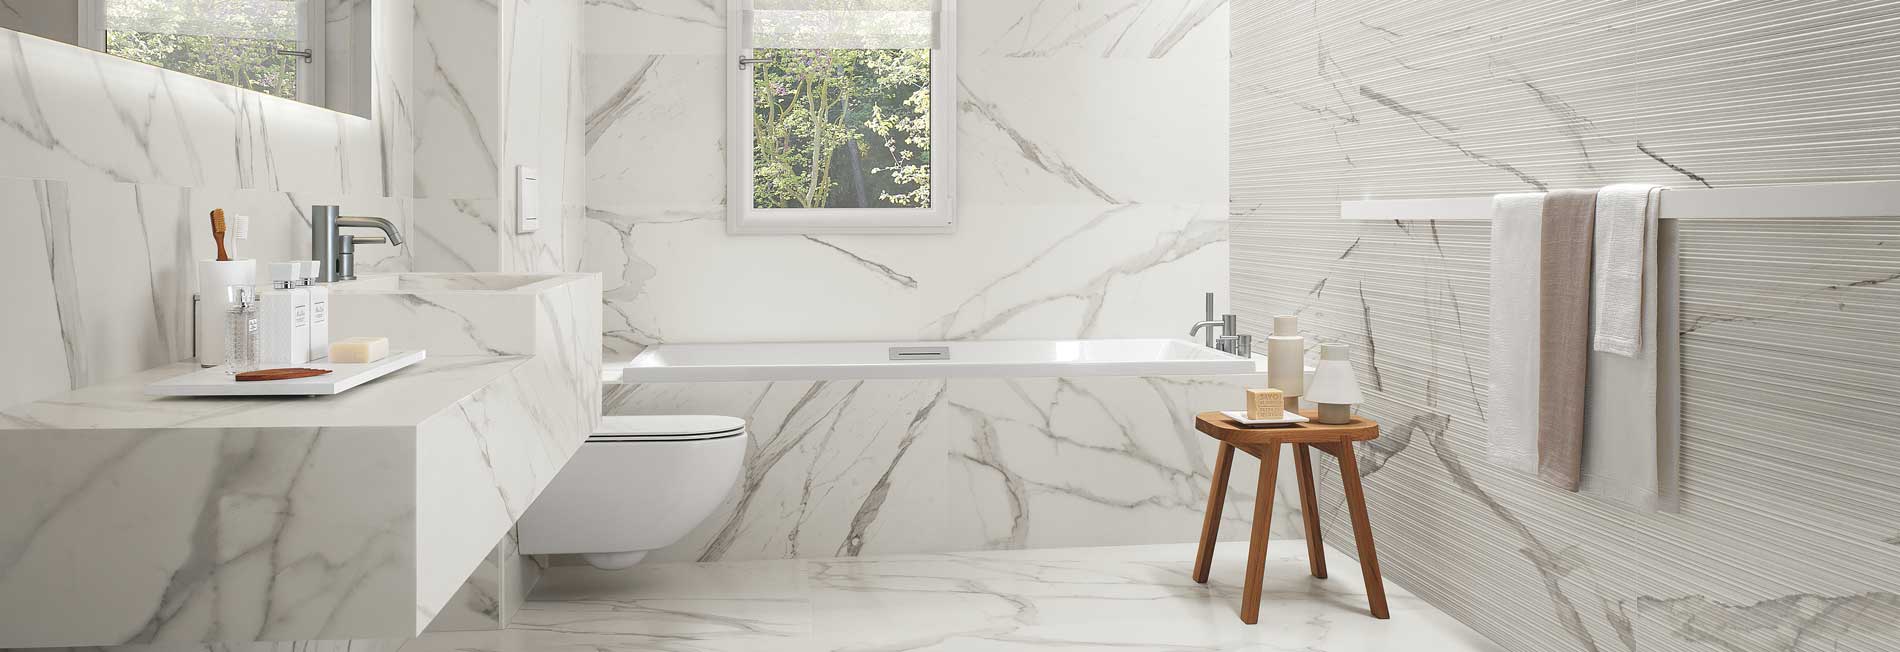 Pisastone® floor tiles-wall tiles-marble Large Format Tiles Available from Pisastone® Stock. Choice of Colours and Sizes. Polished Concrete Tiles. 